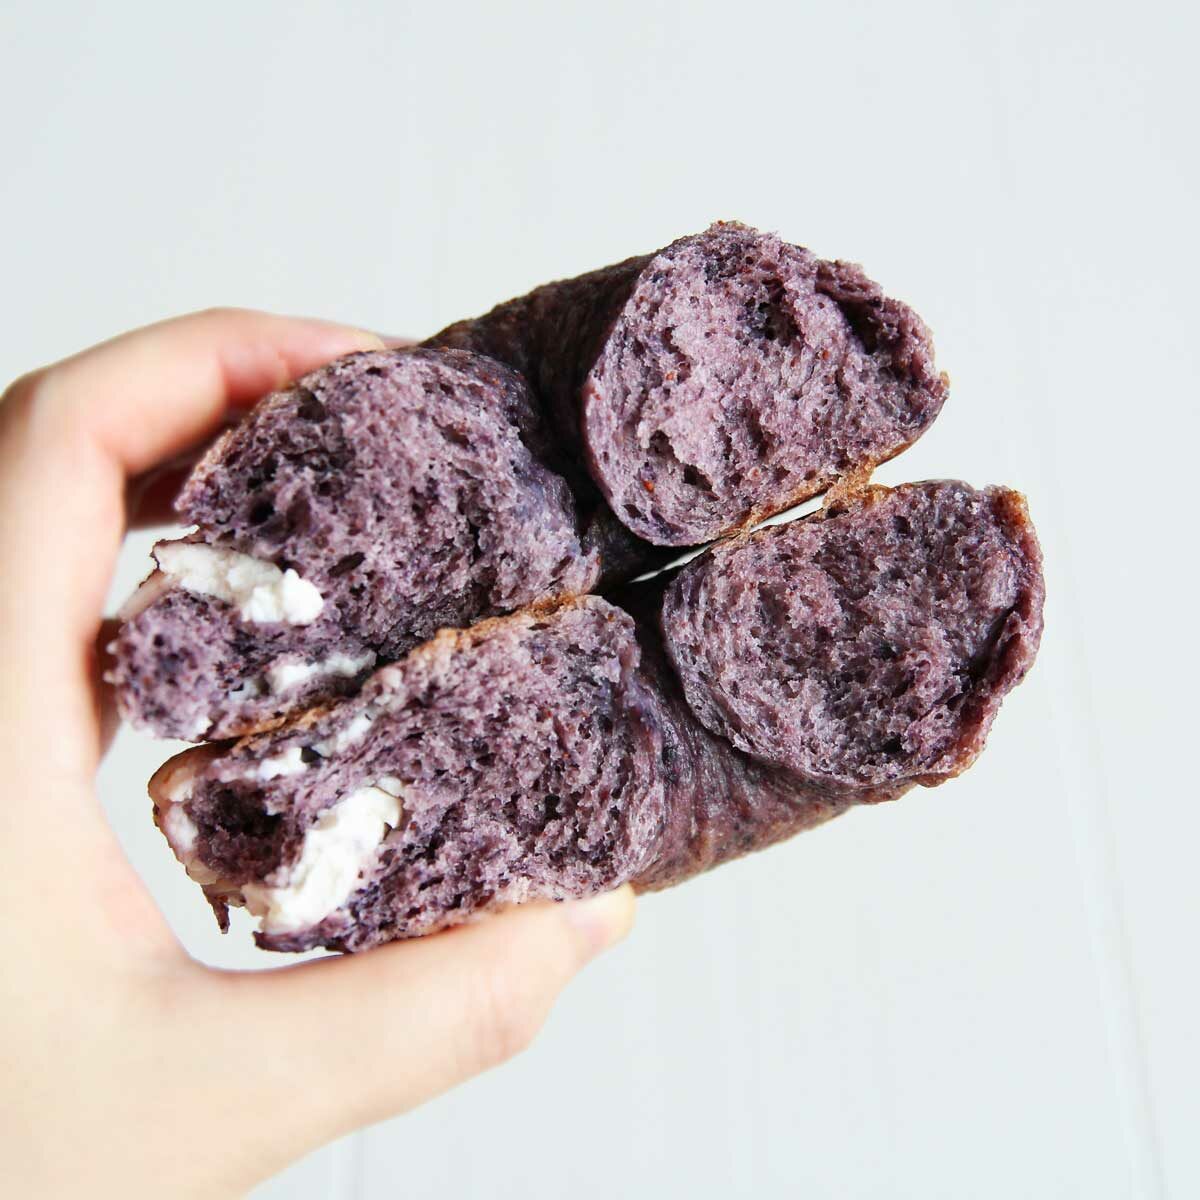 Chocolate Chip Blueberry Bagels (Easy, Cream Cheese Stuffed Bagel Recipe) - bagels